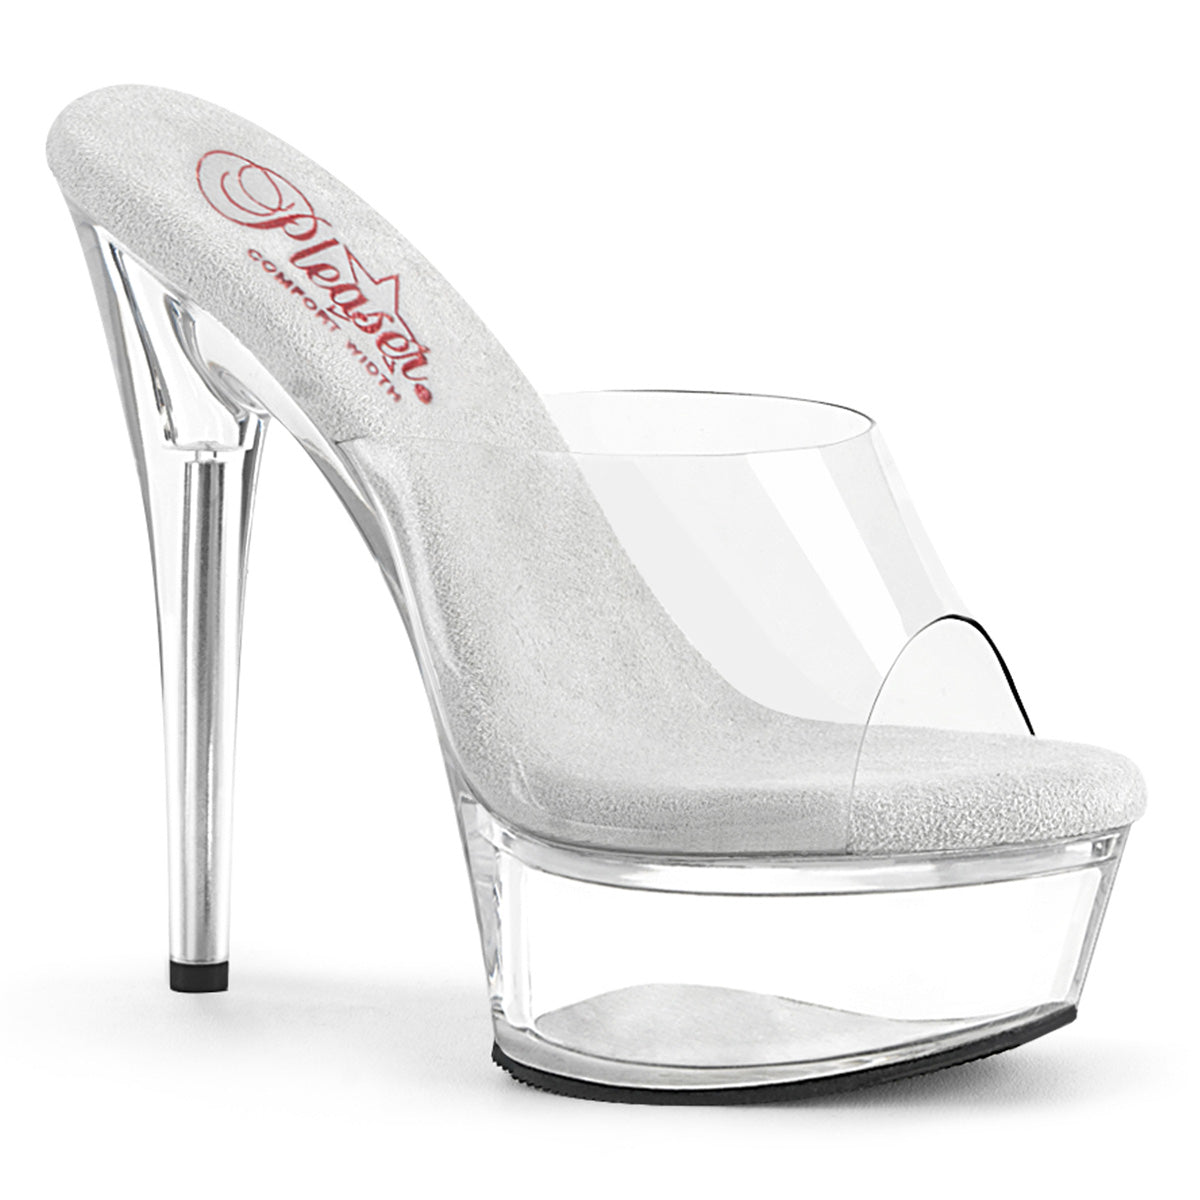 6 Inch Heel EXCITE-601 Clear